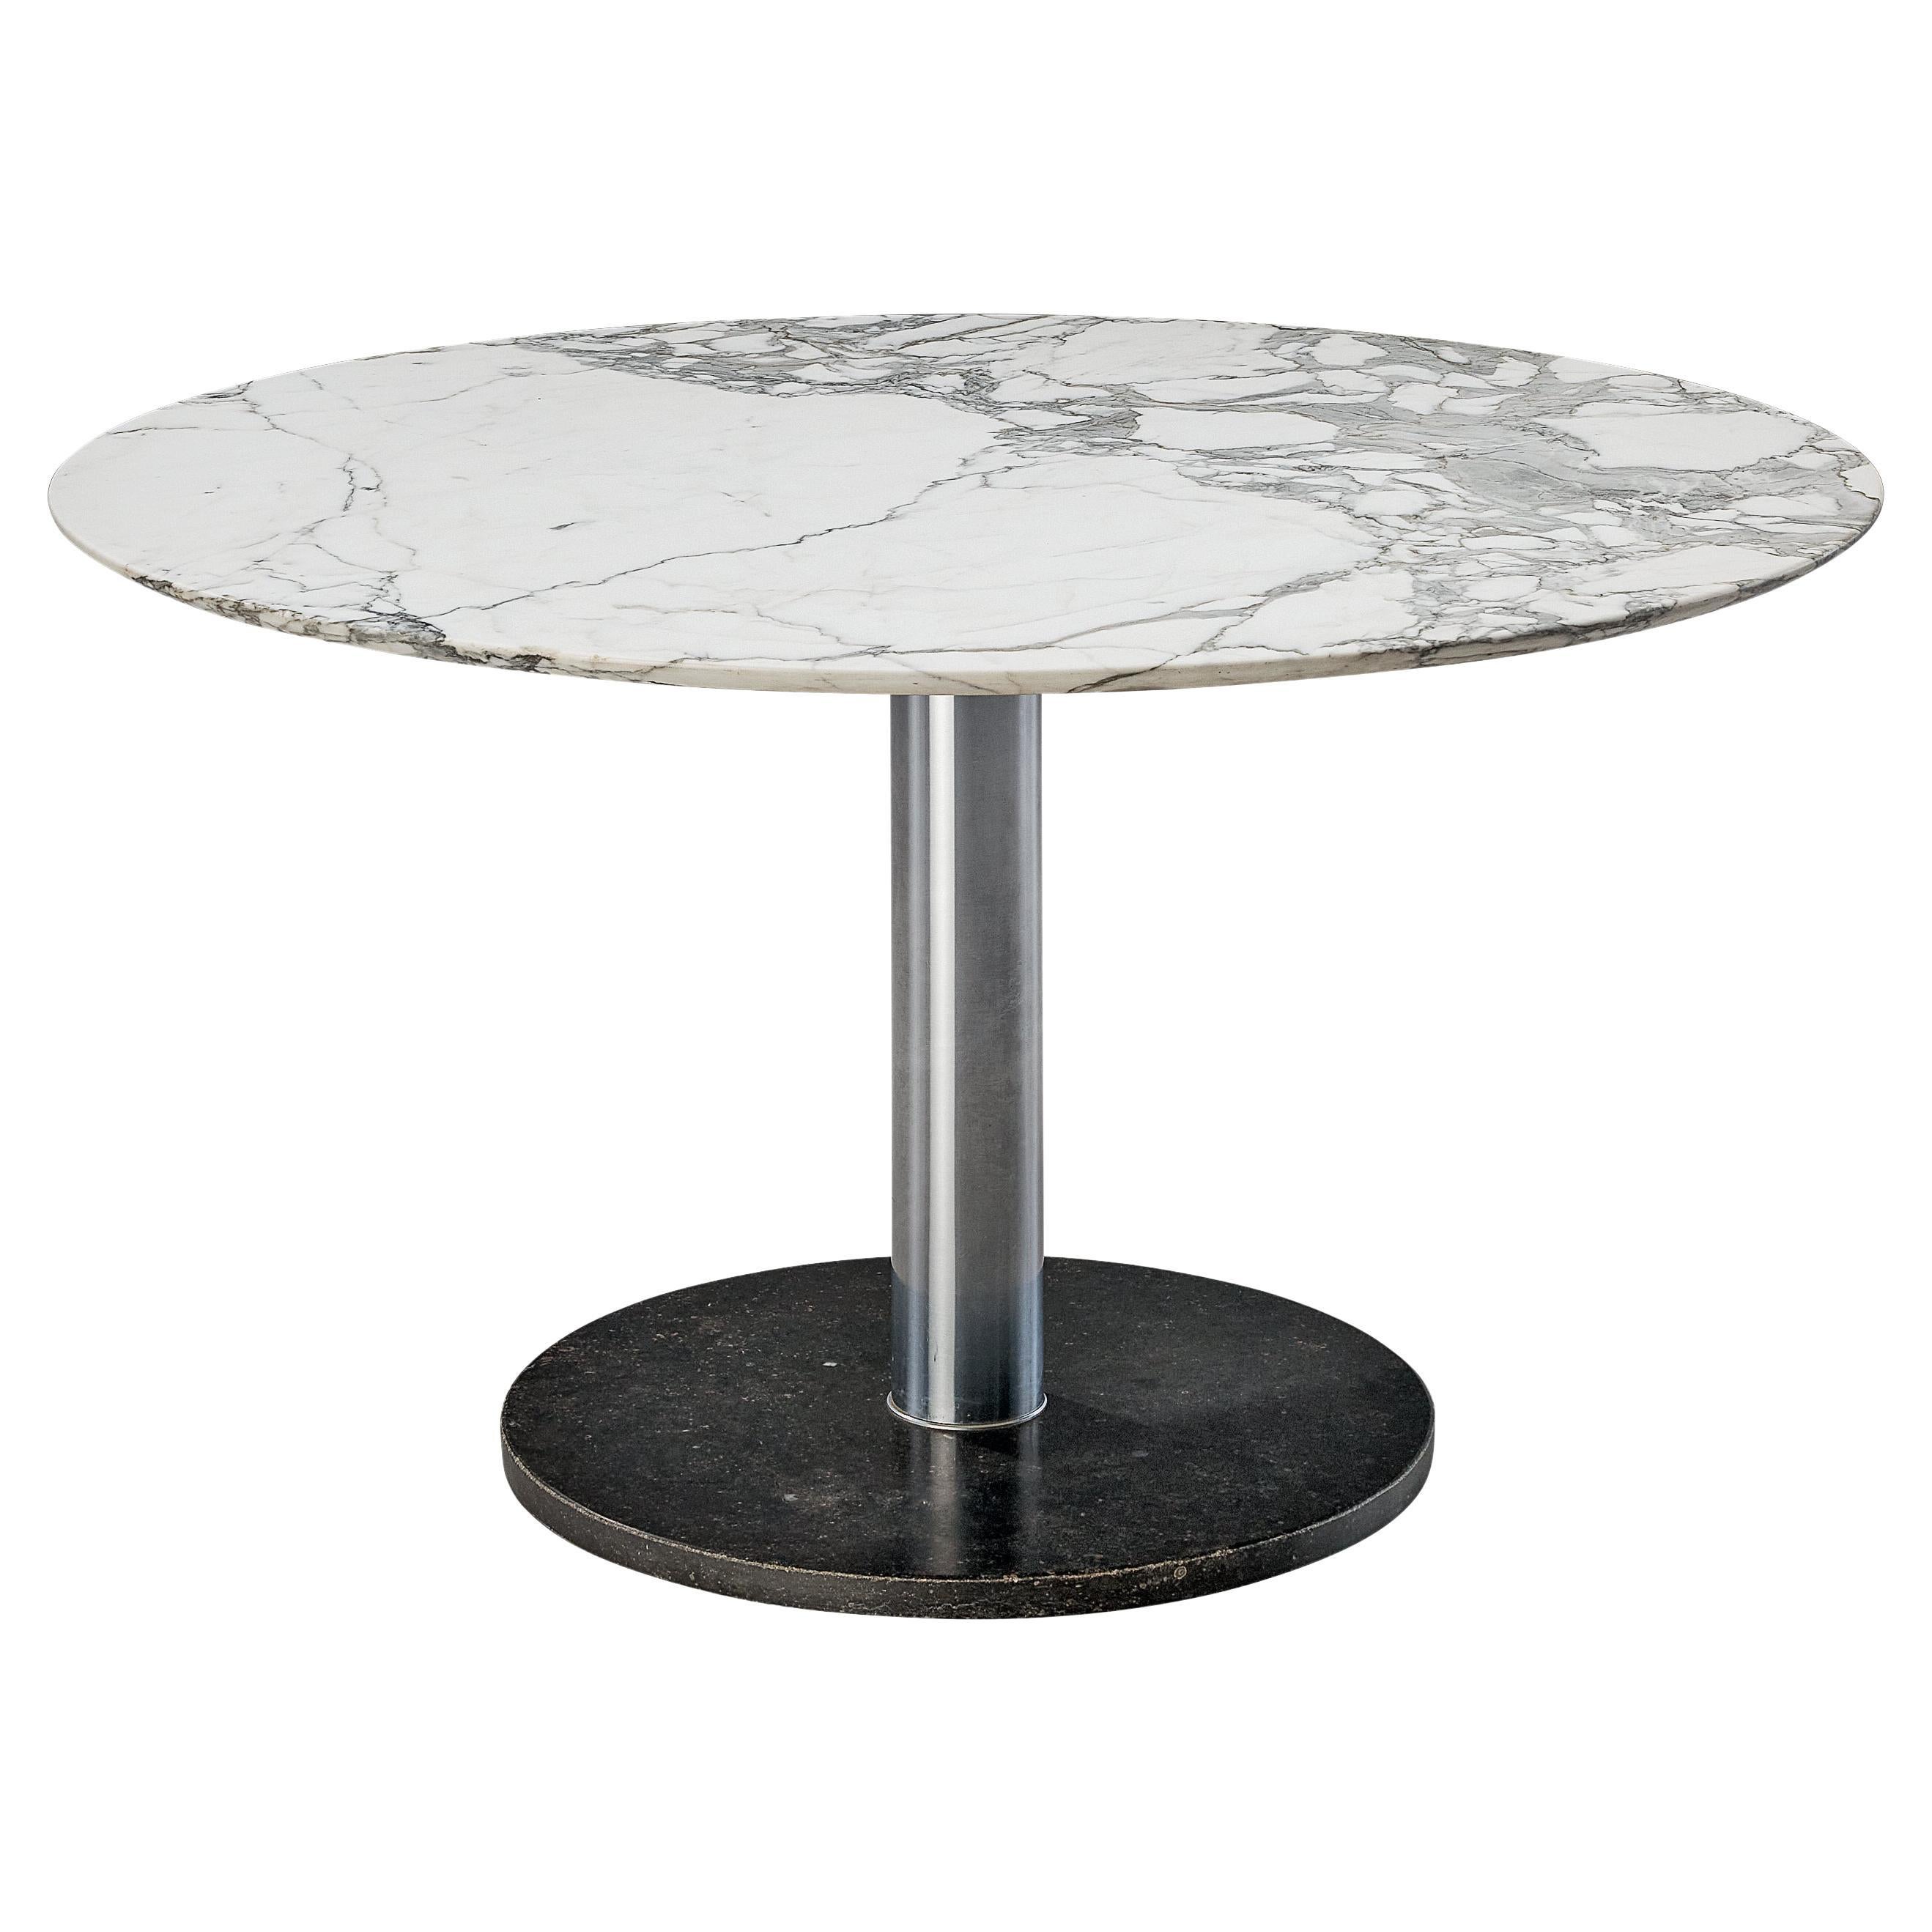 Alfred Hendrickx Pedestal Dining Room Table in Marble and Granite